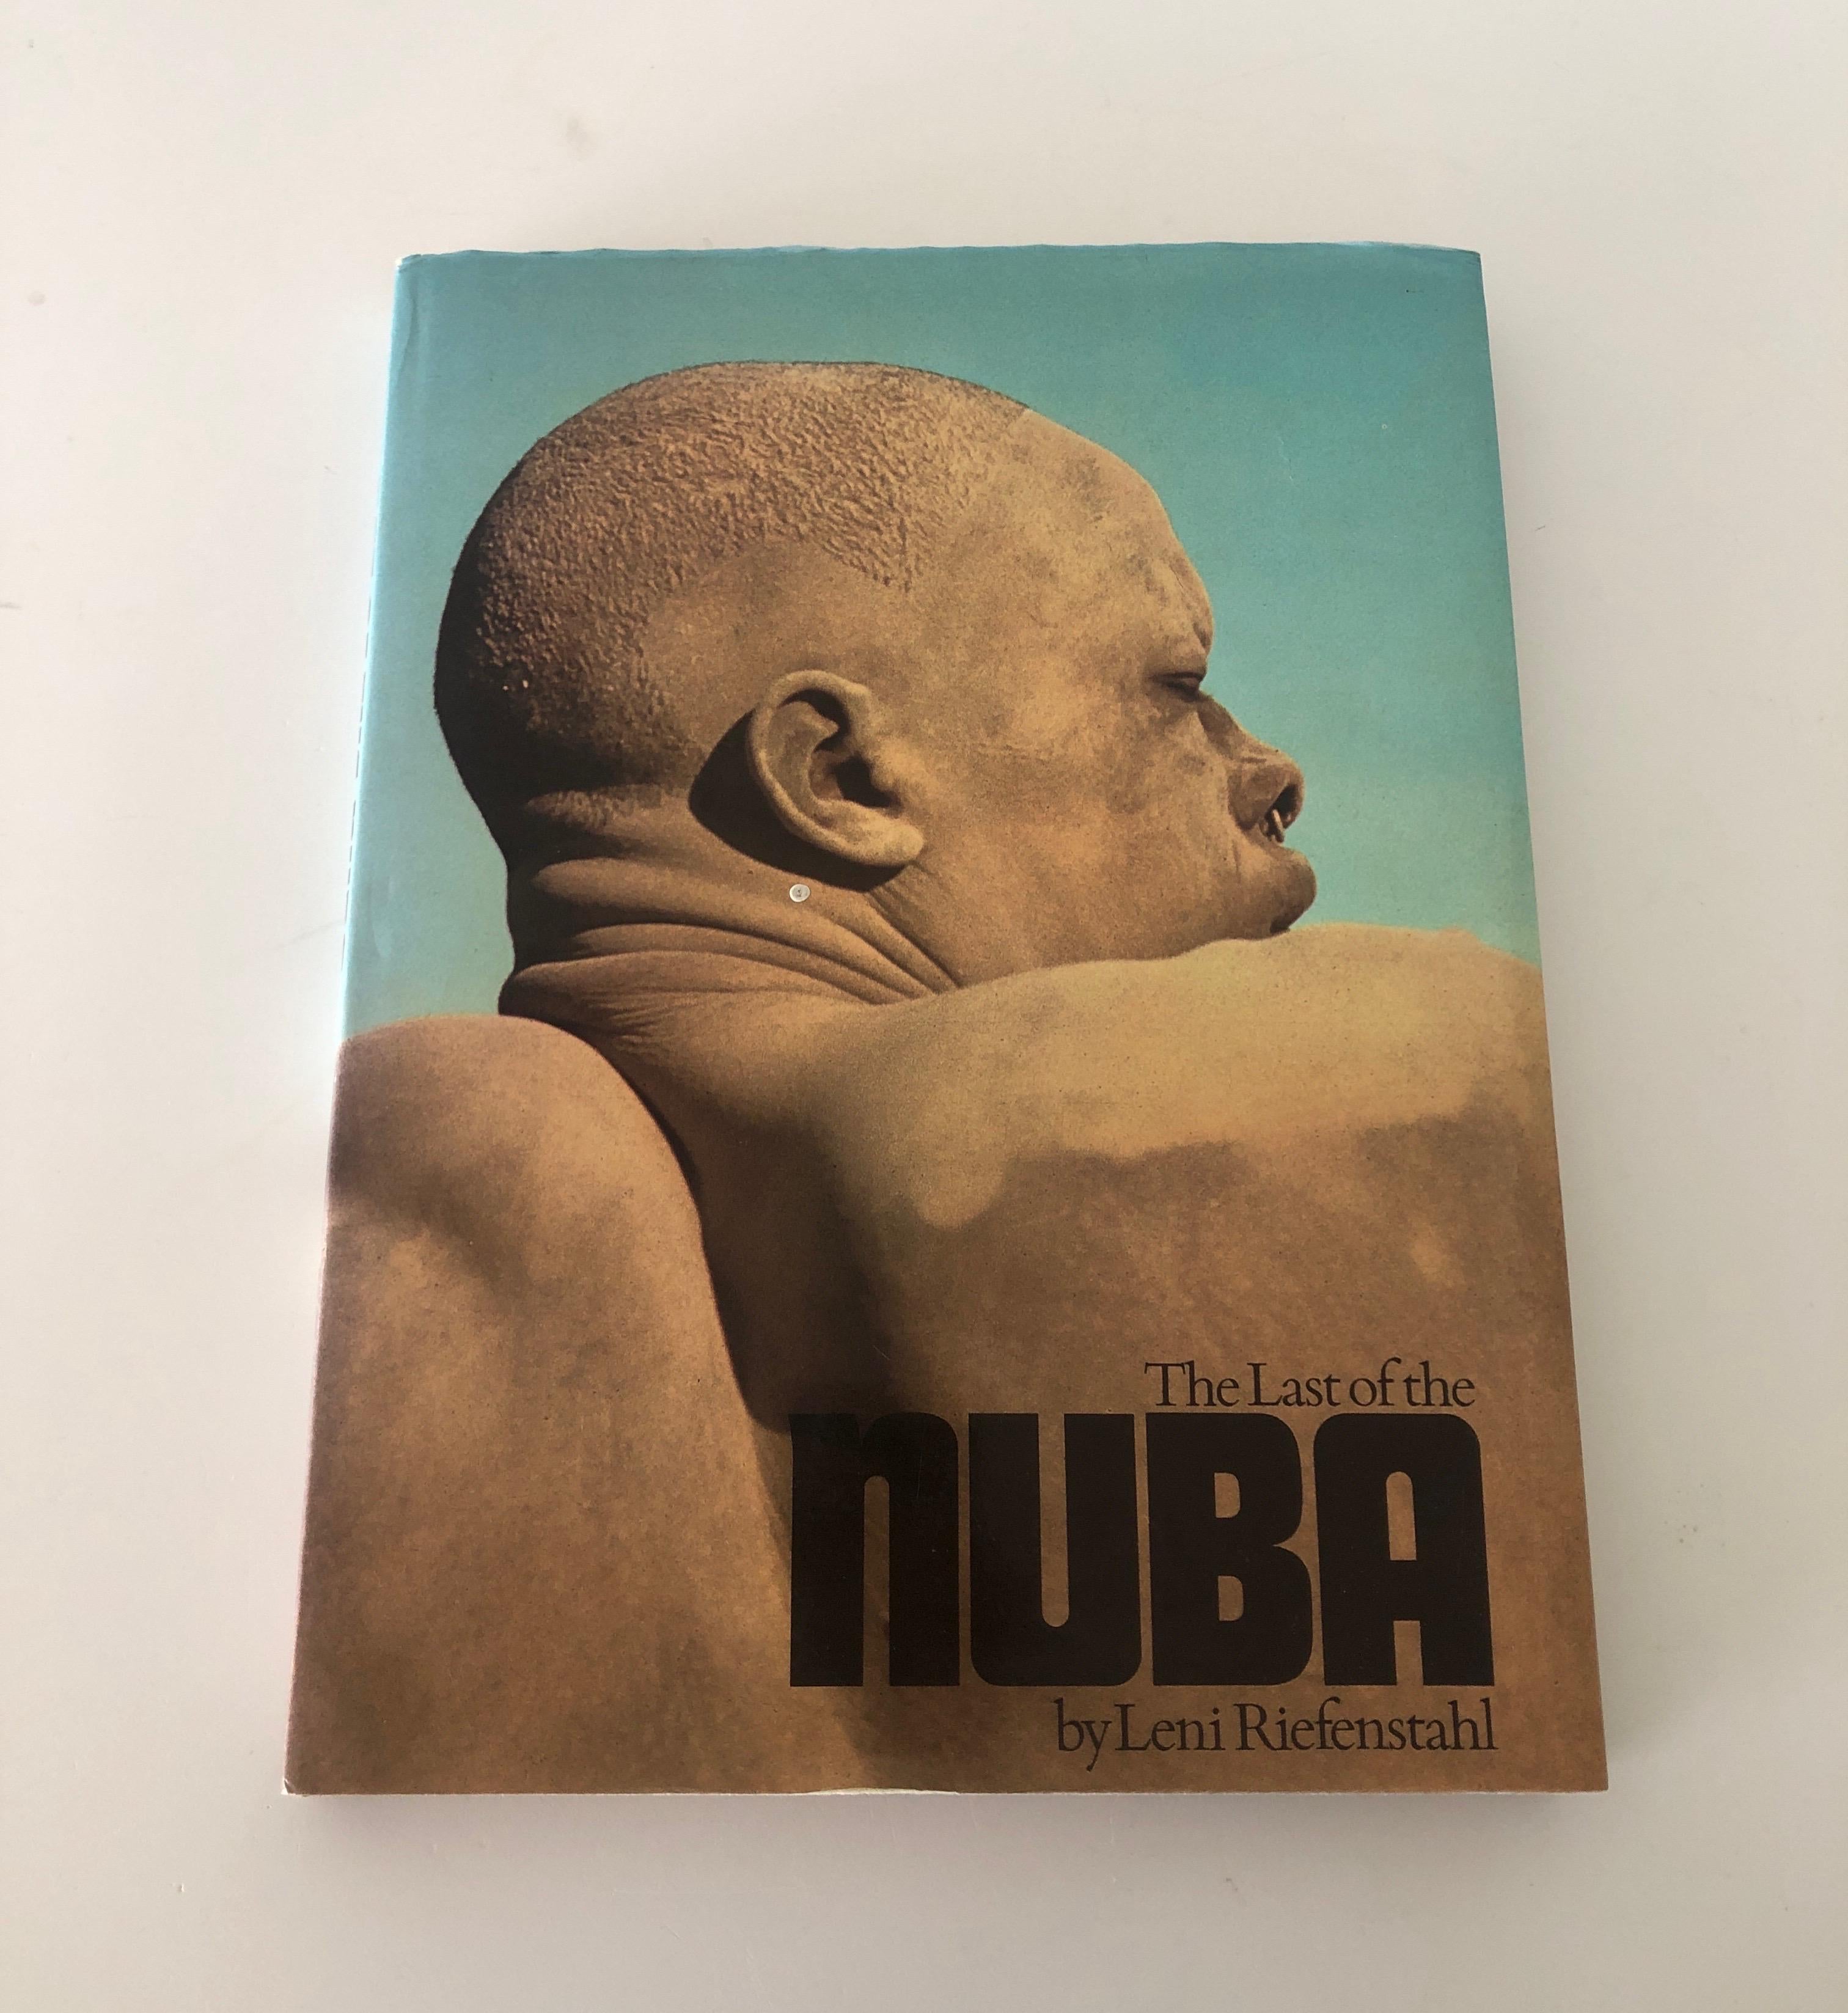 The Last of the Nuba by Leni Riefenstahl Vintage Decorative hardcover book
Publisher ? : ? Harper & Row; 1st edition (January 1, 1974)
Language ? : ? English
Hardcover ? : ? 208 pages
Size: 12 x 9.5 x 0.75.